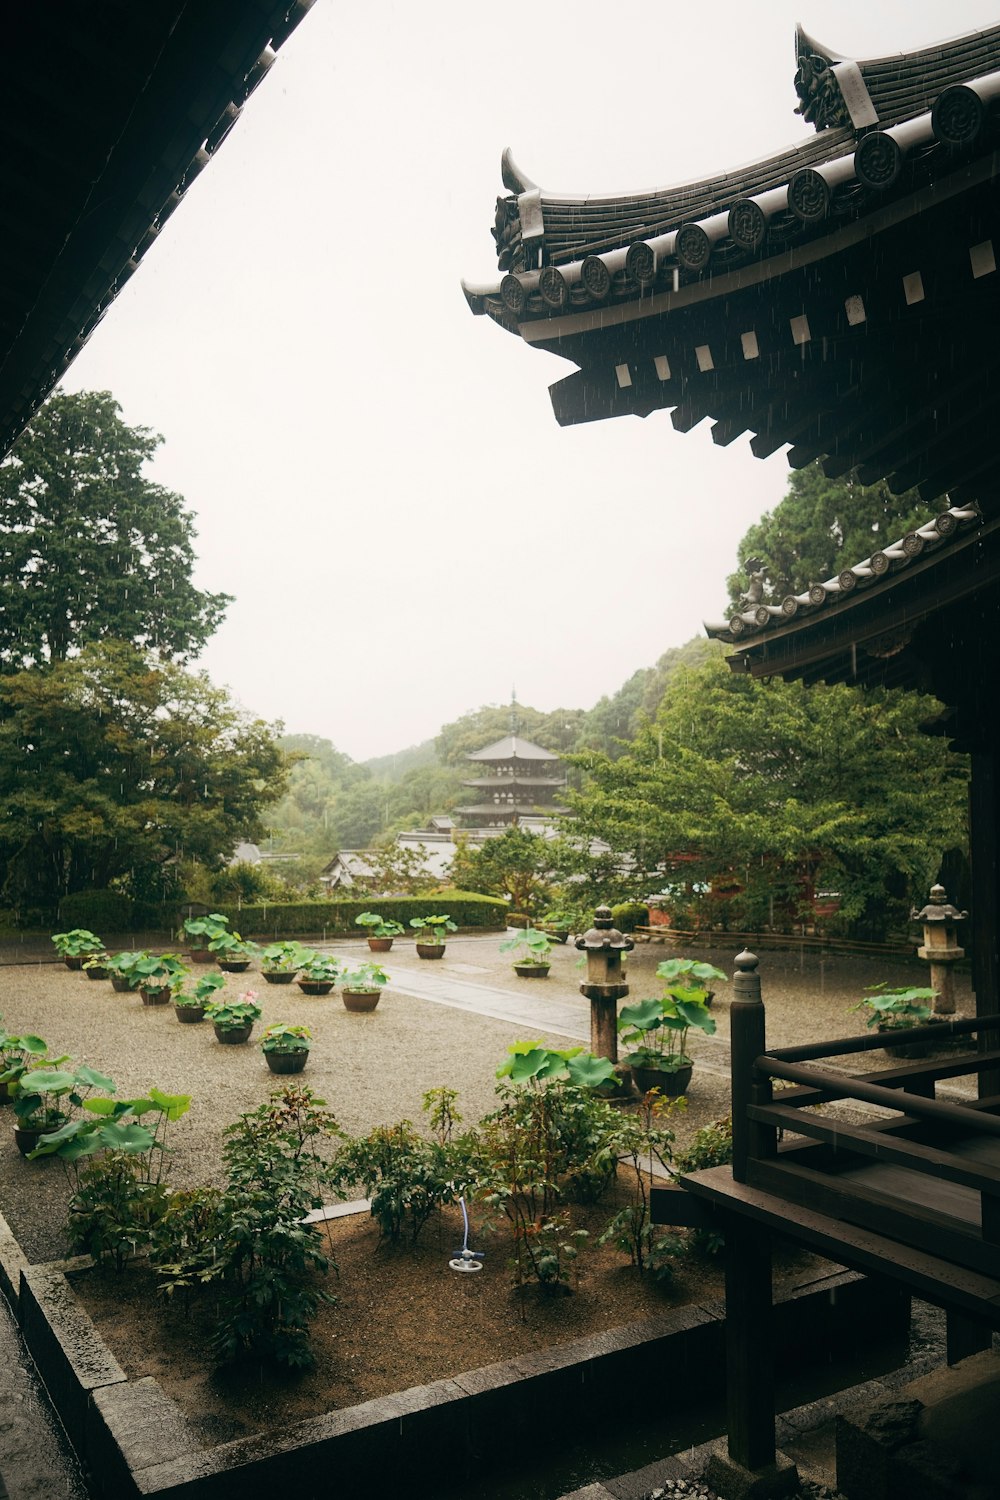 a view of a garden from inside a building